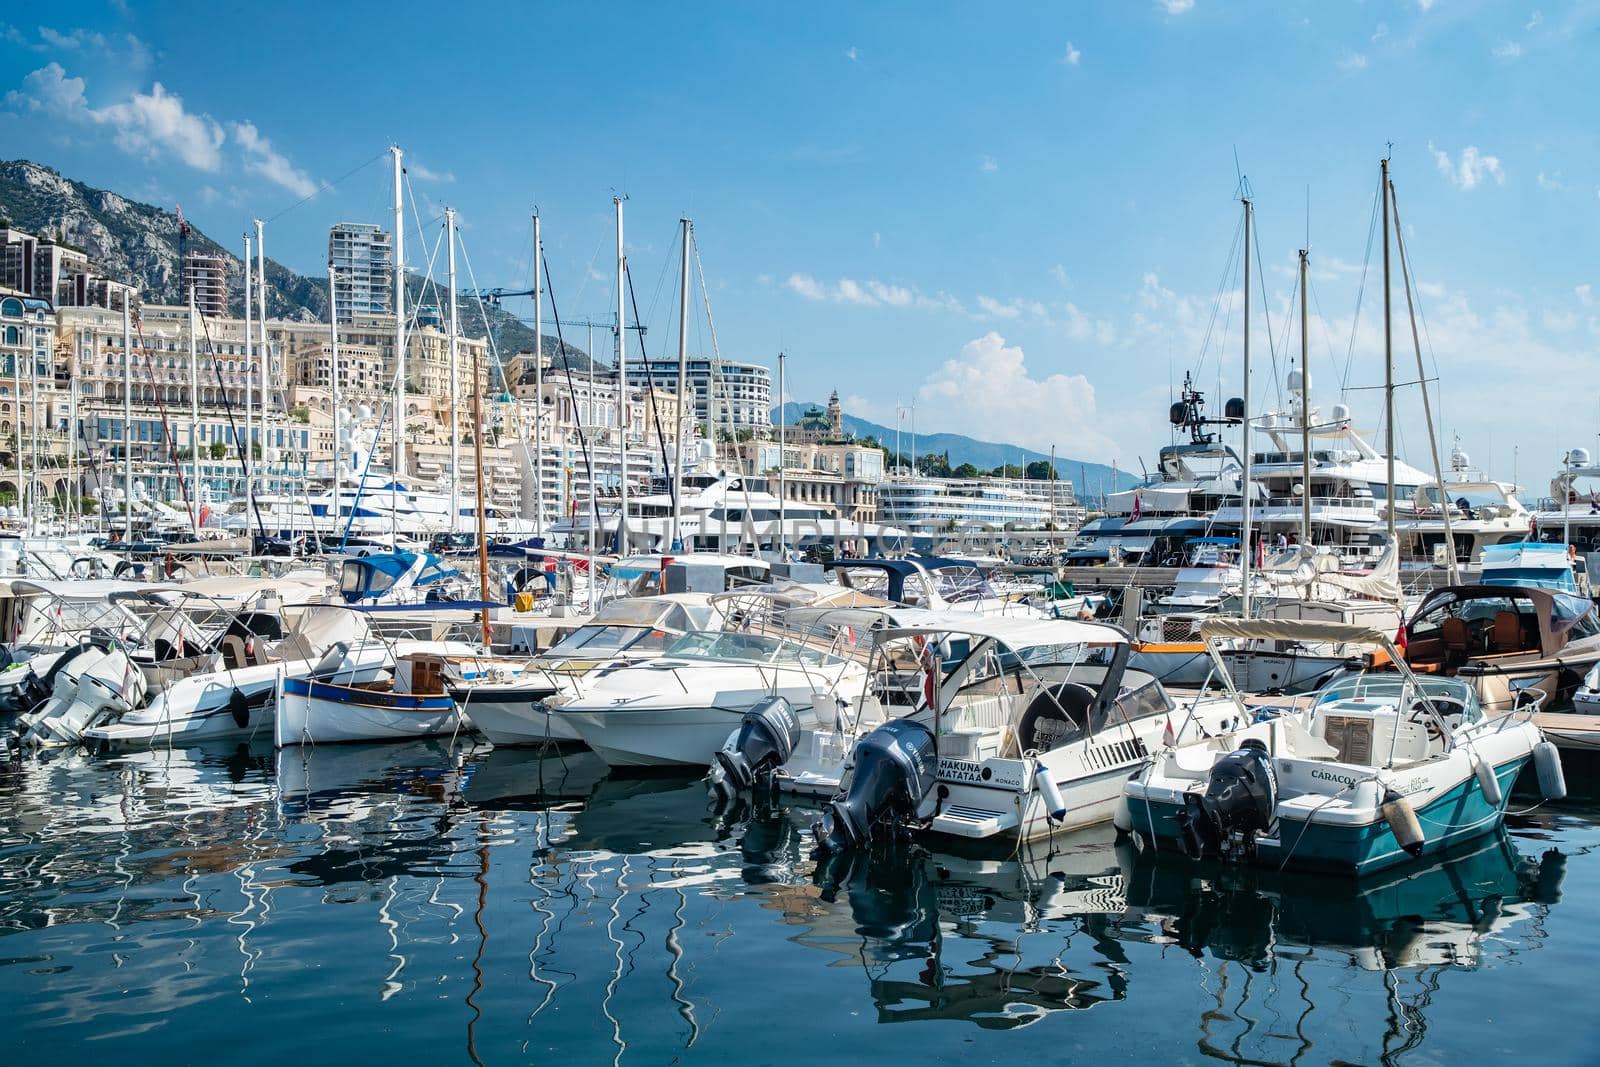 Monaco, Monte-Carlo, 06 August 2018: Tranquillity in port Hercules, is the parked boats, sunny day, many yachts and boats, RIVA, Casino Monte-Carlo, megayachts, massif of expensive real estate by vladimirdrozdin